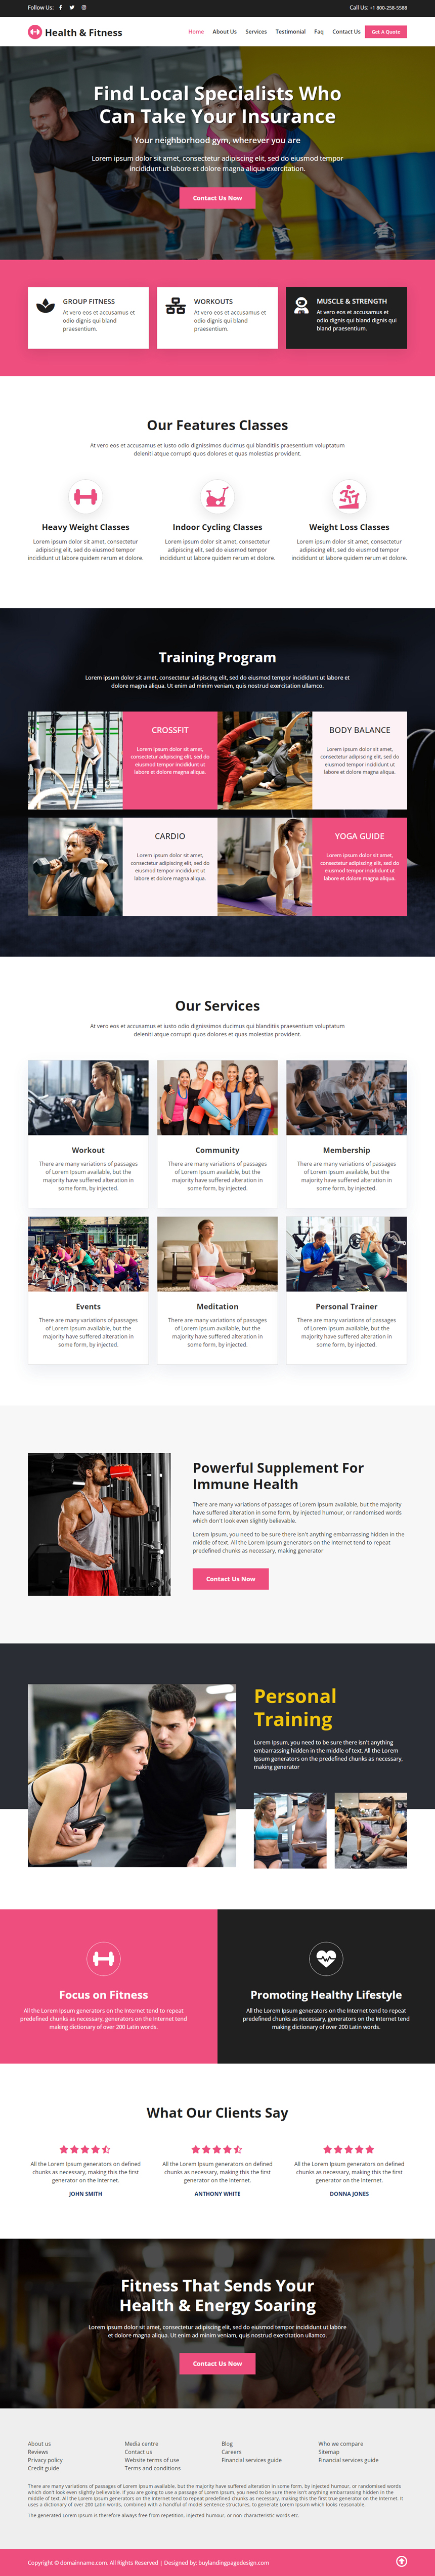 responsive health and fitness website template